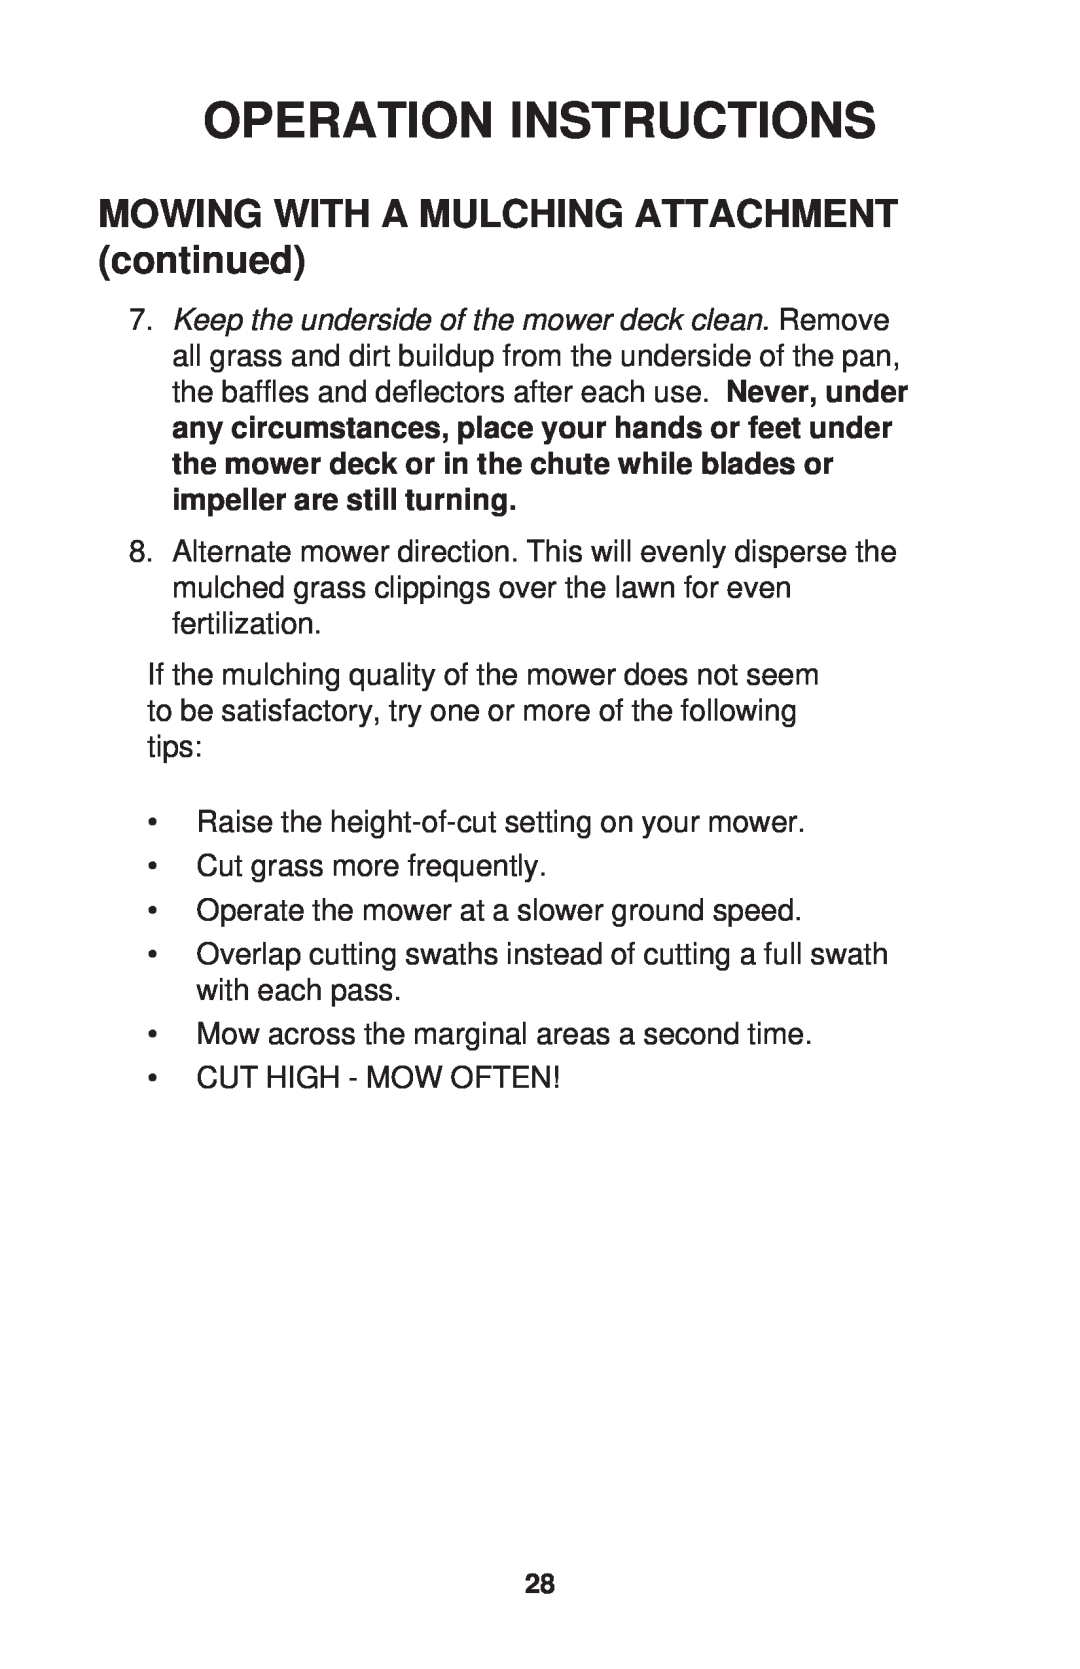 Dixon ZTR 34, ZTR 44, ZTR 34 manual MOWING WITH A MULCHING ATTACHMENT continued, Operation Instructions 